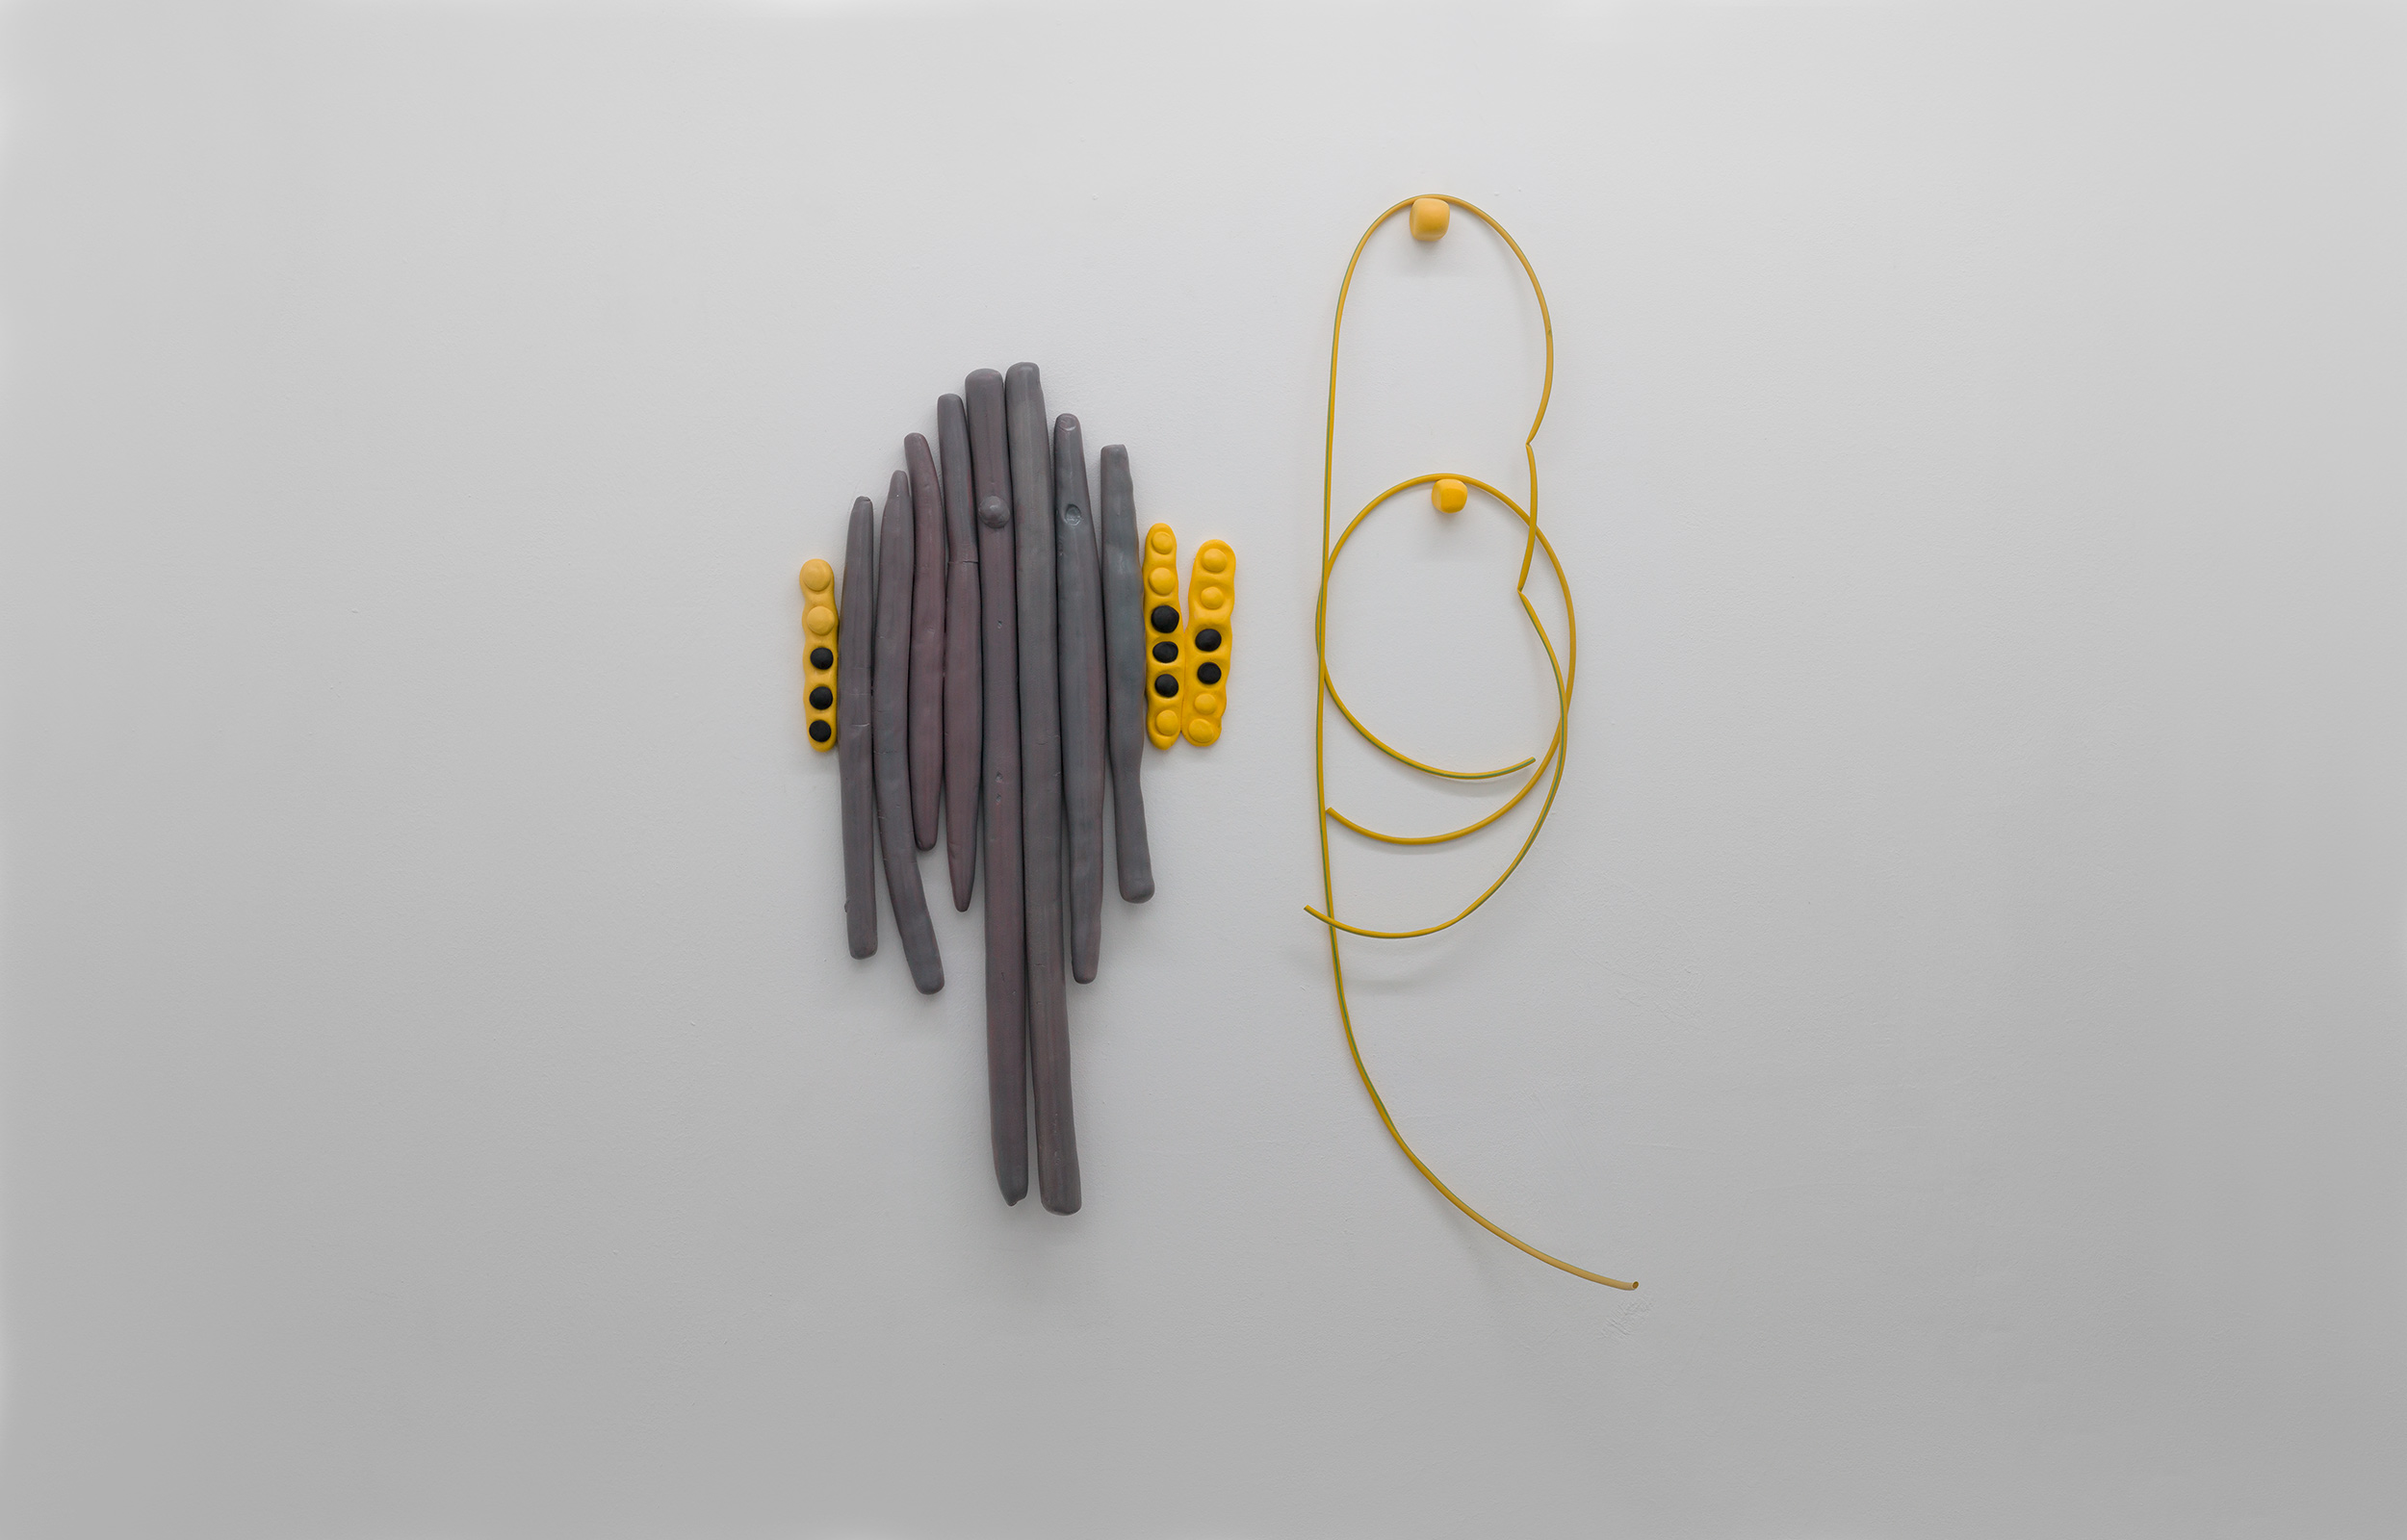 rubber,wire,clay_dimensions variable_2018